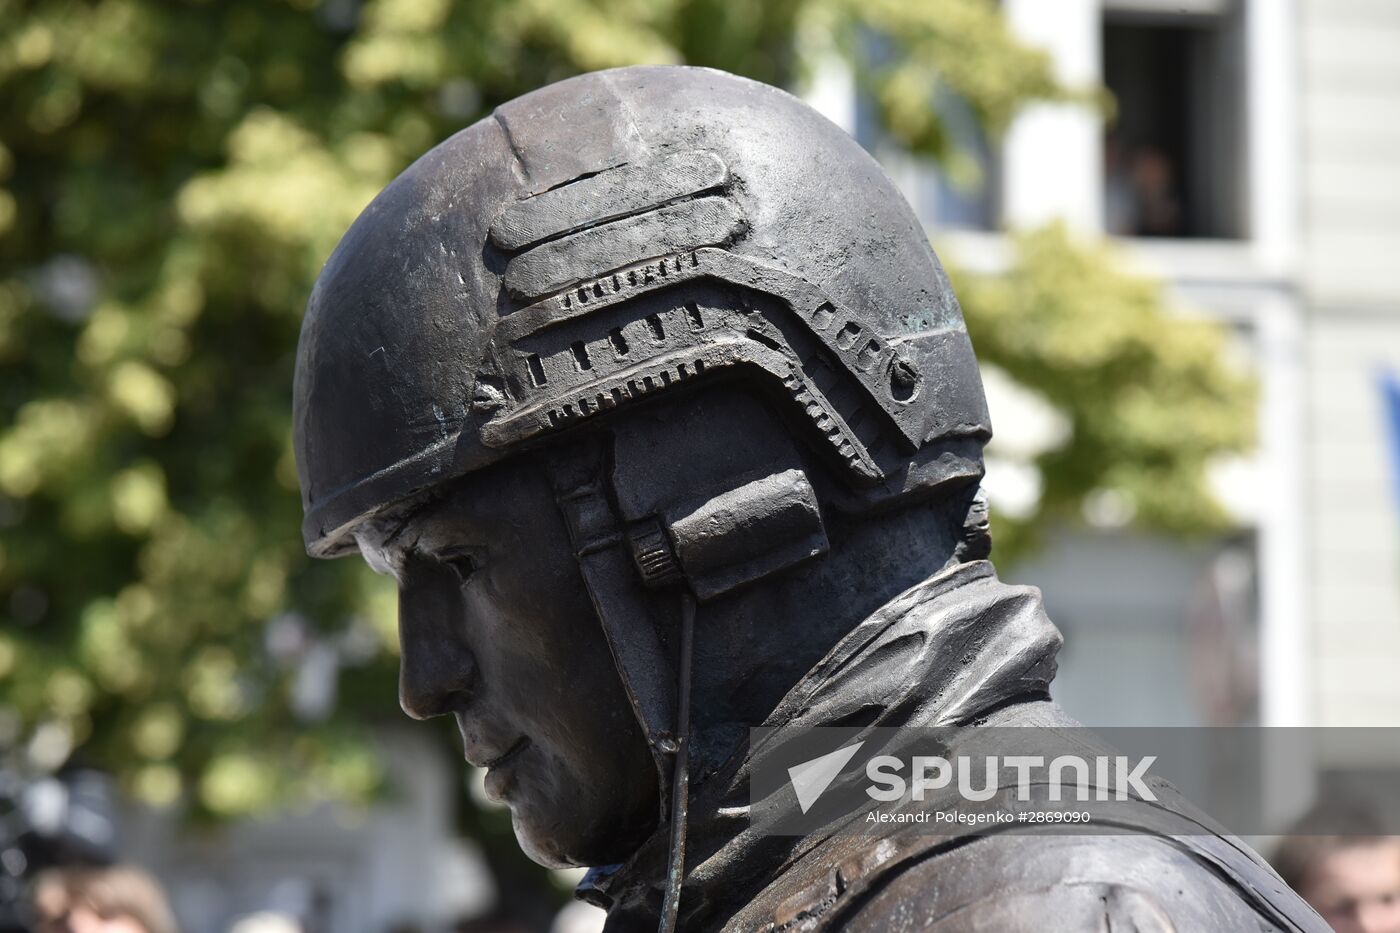 Polite People monument unveiled in Crimea